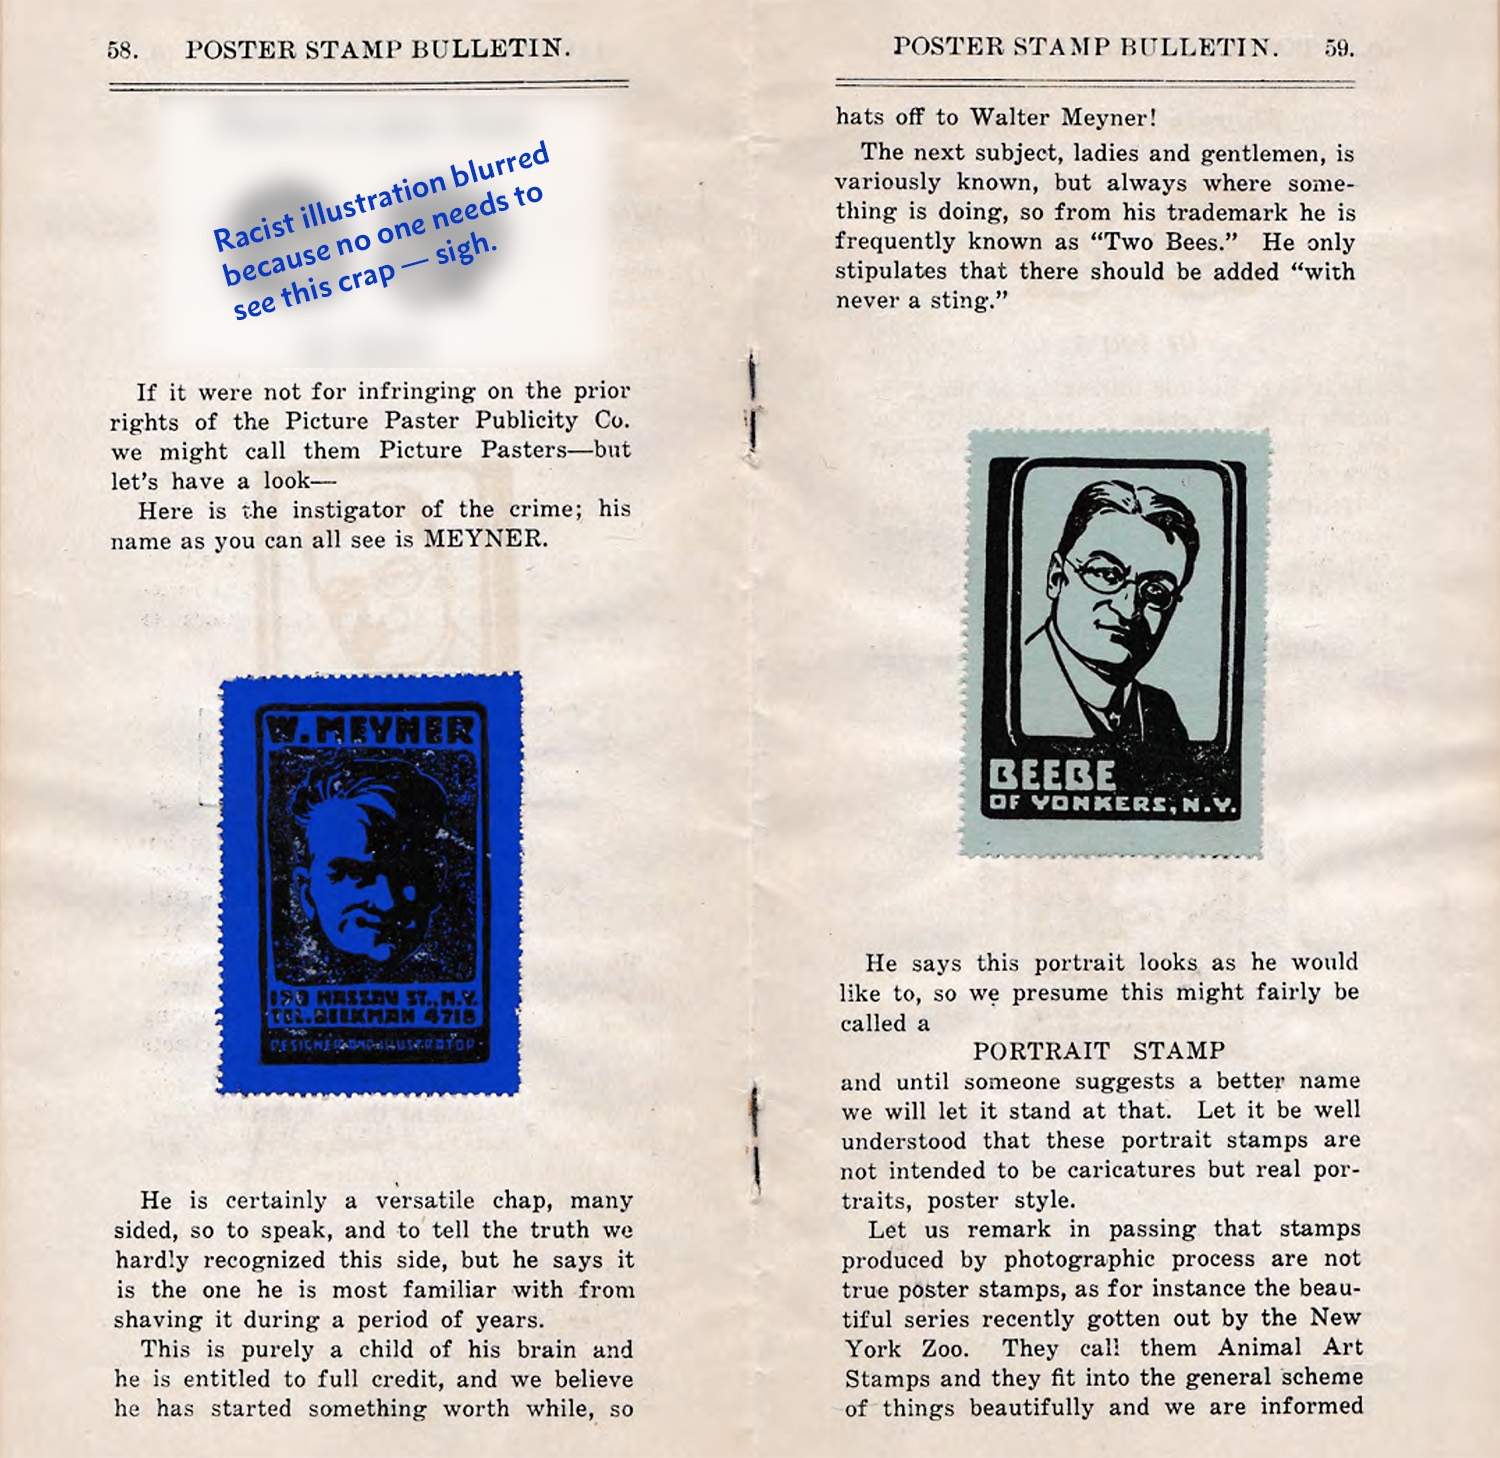 A cheeky article and examples of his work from Poster Stamp Bulletin